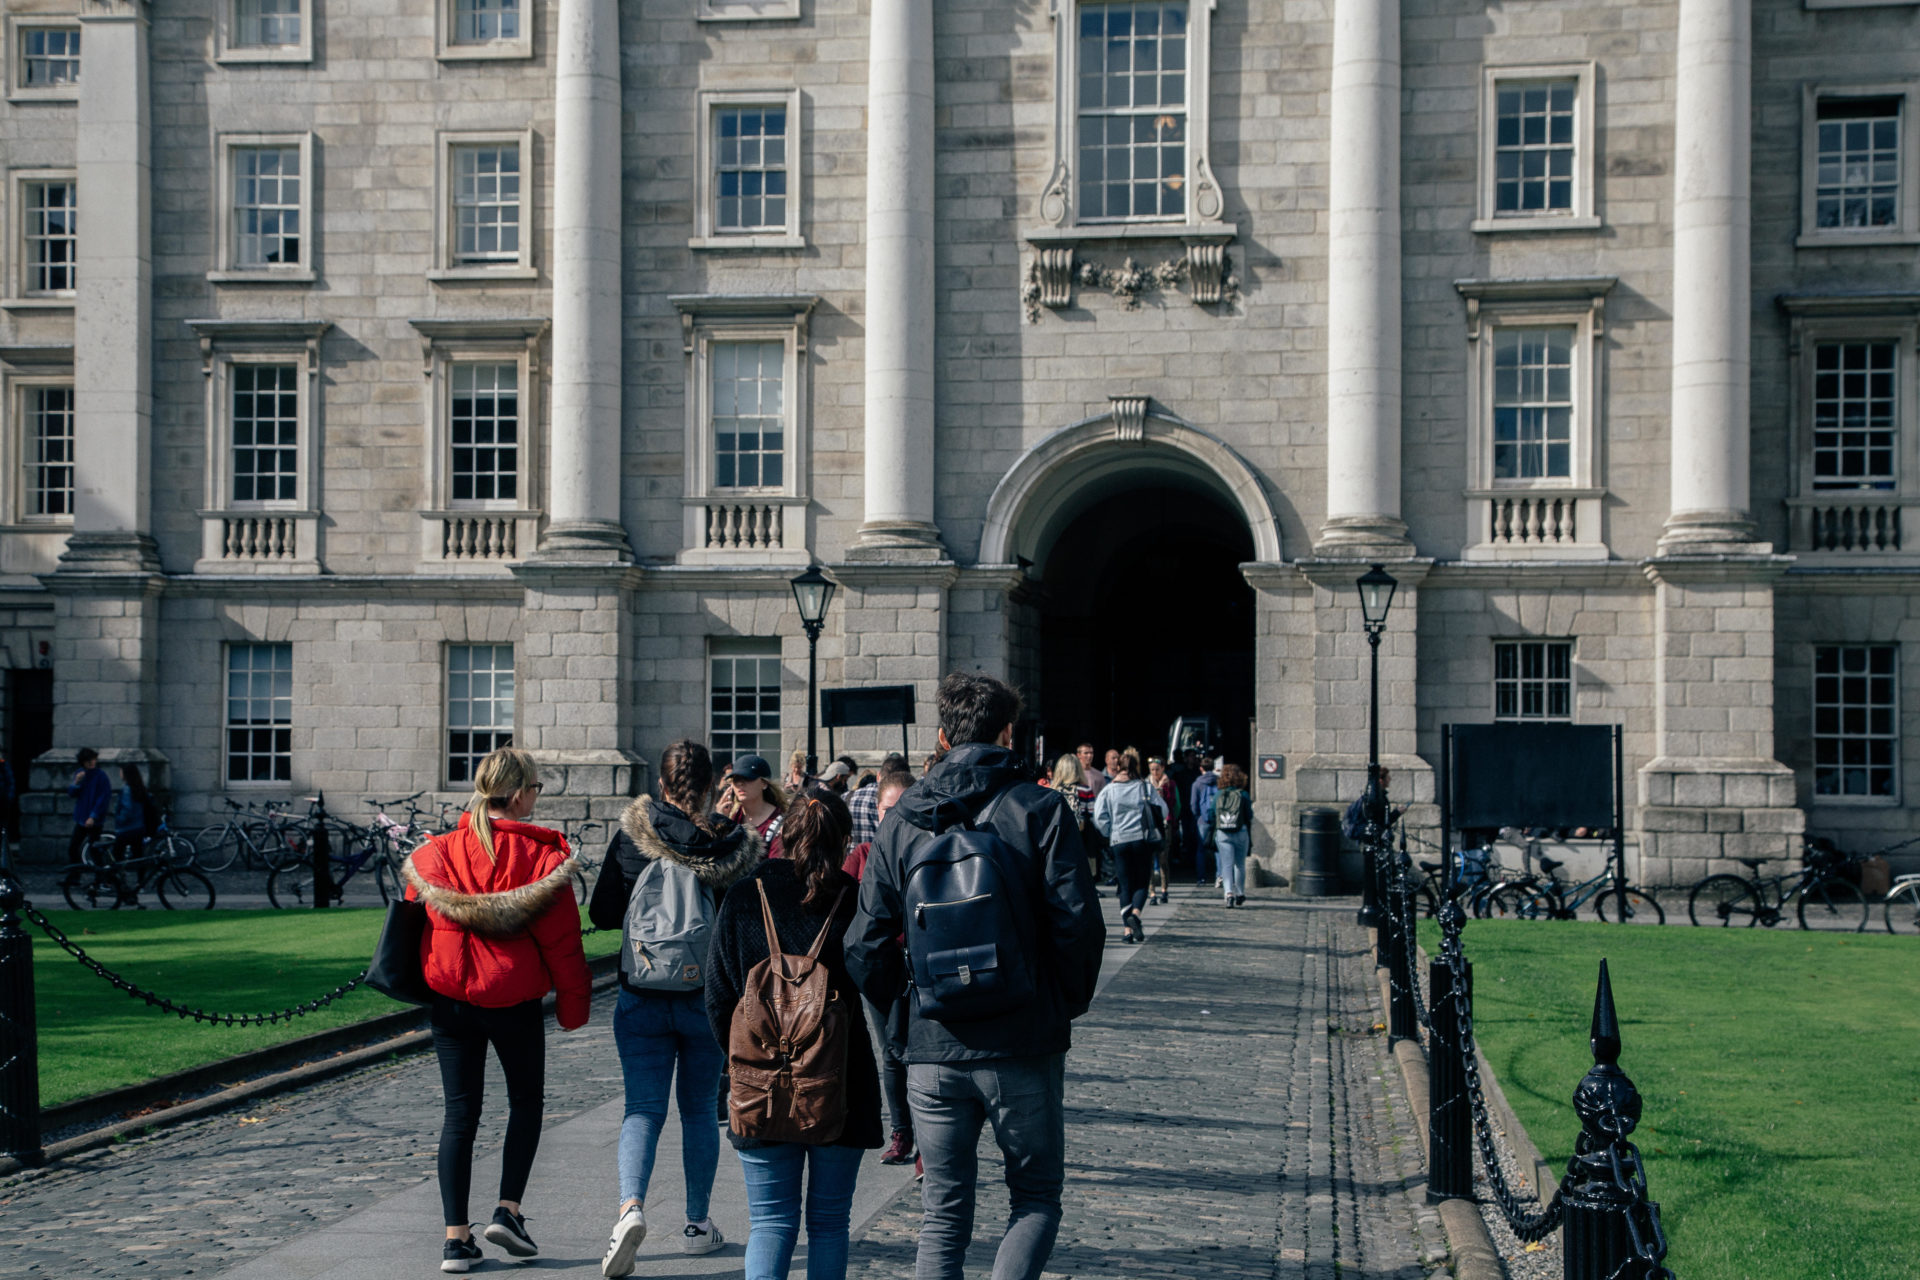 Main image shows students at Trinity College.